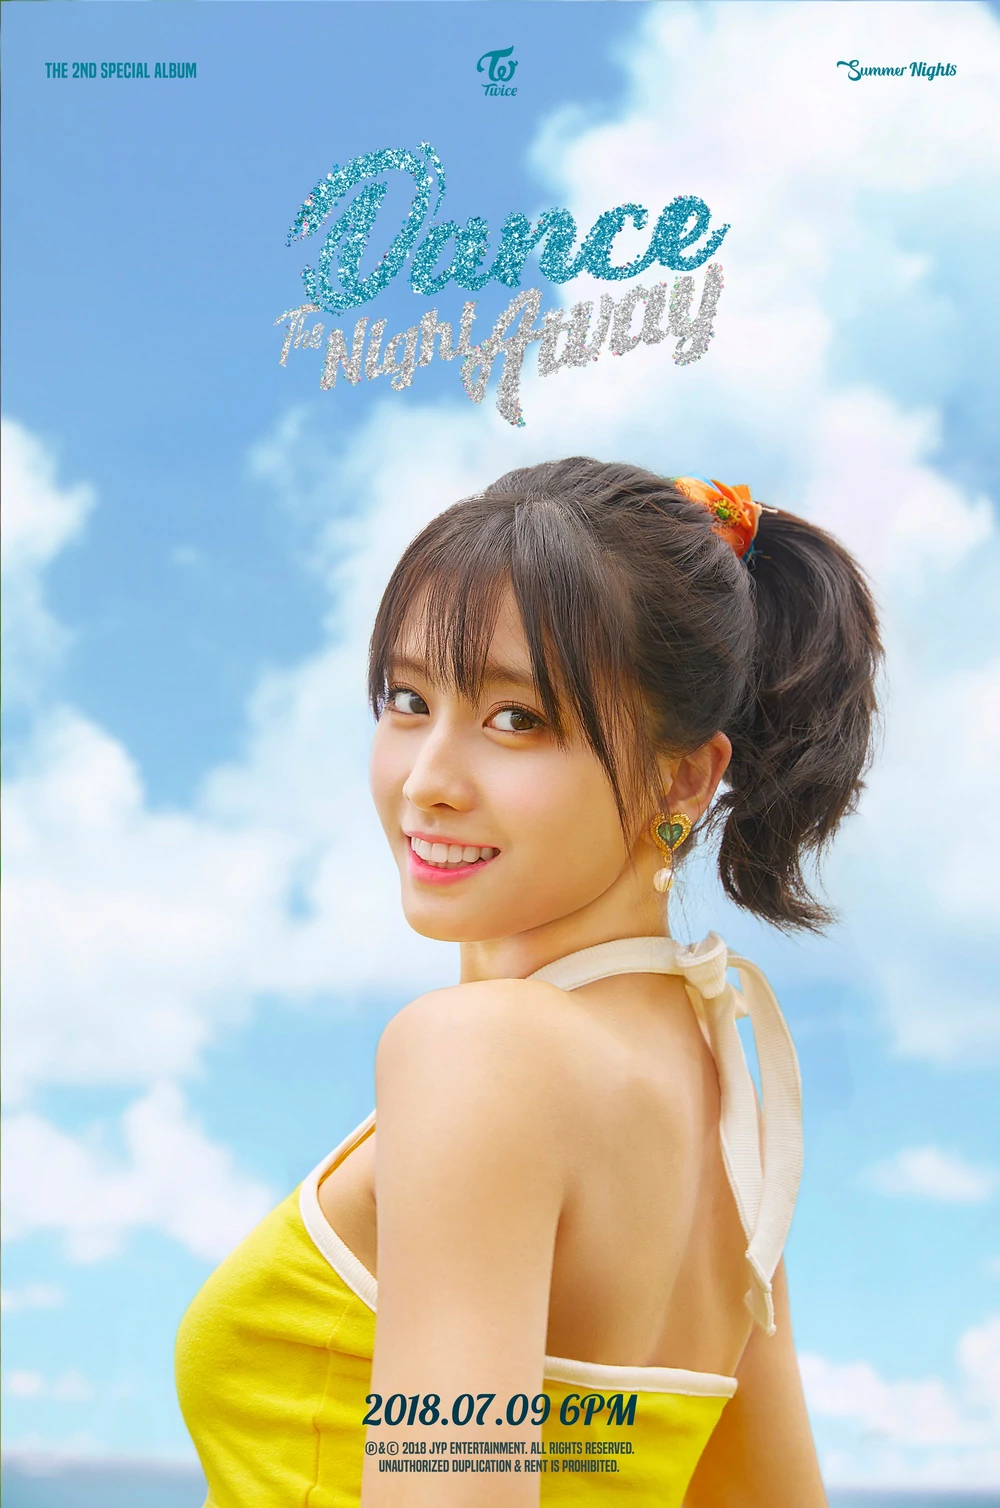 Twice Summer Nights Momo Concept Teaser Picture Image Photo Kpop K-Concept 3